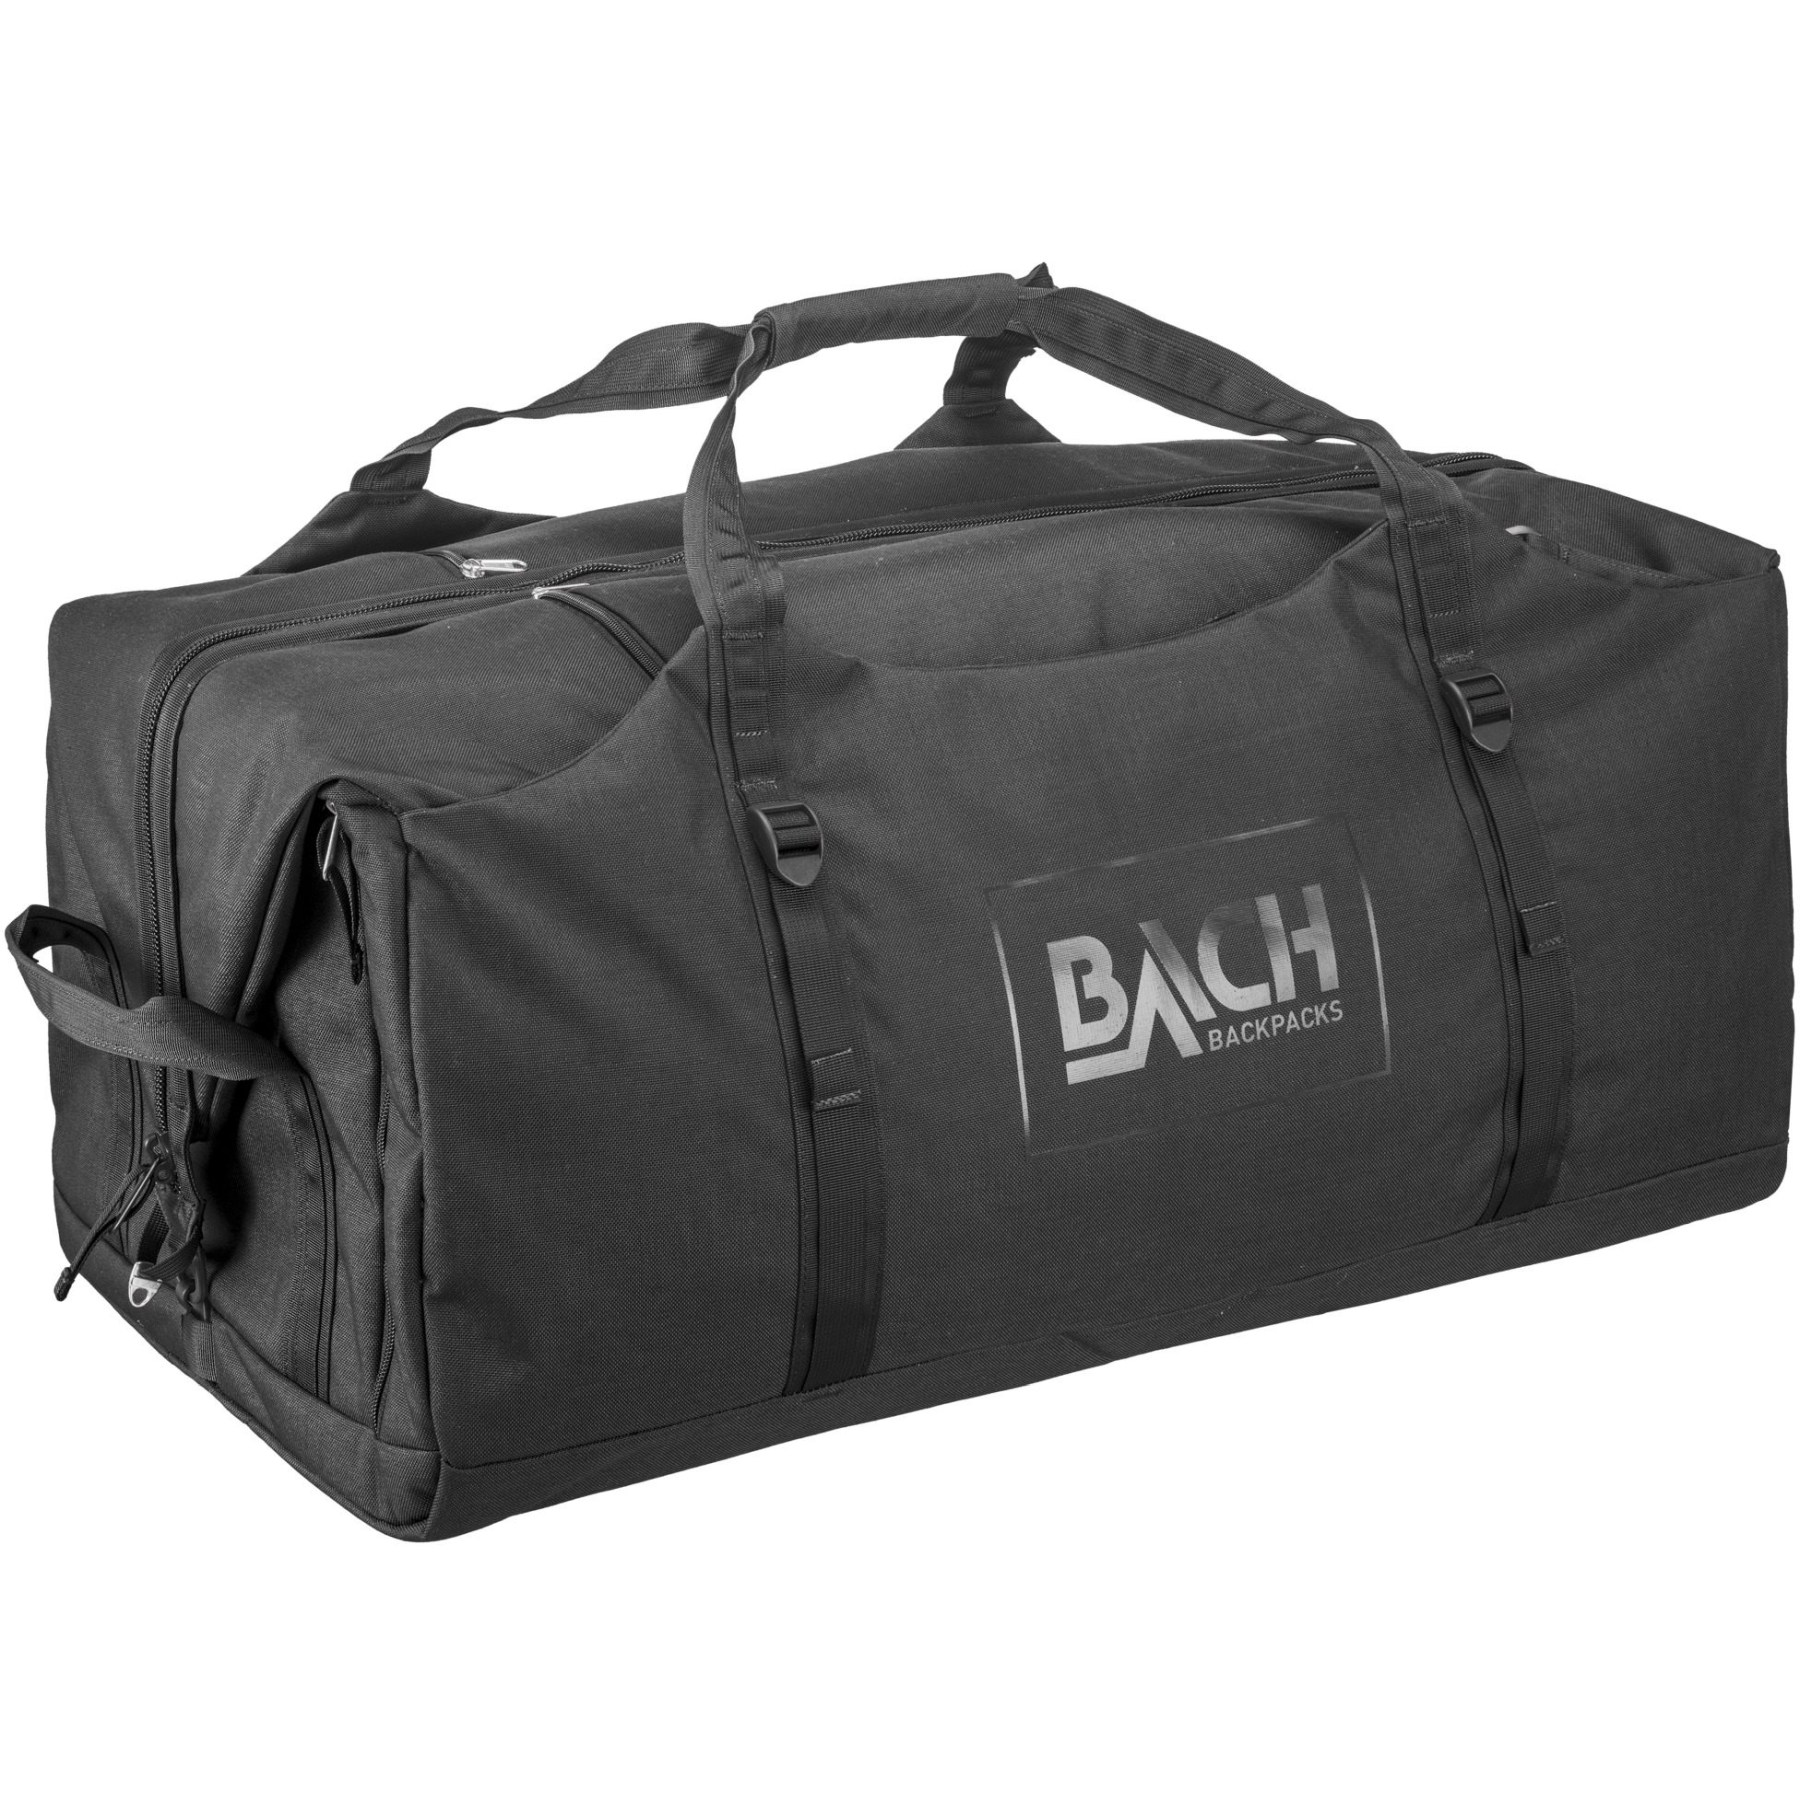 Picture of Bach Dr. Duffel 110 Travel Bag - black